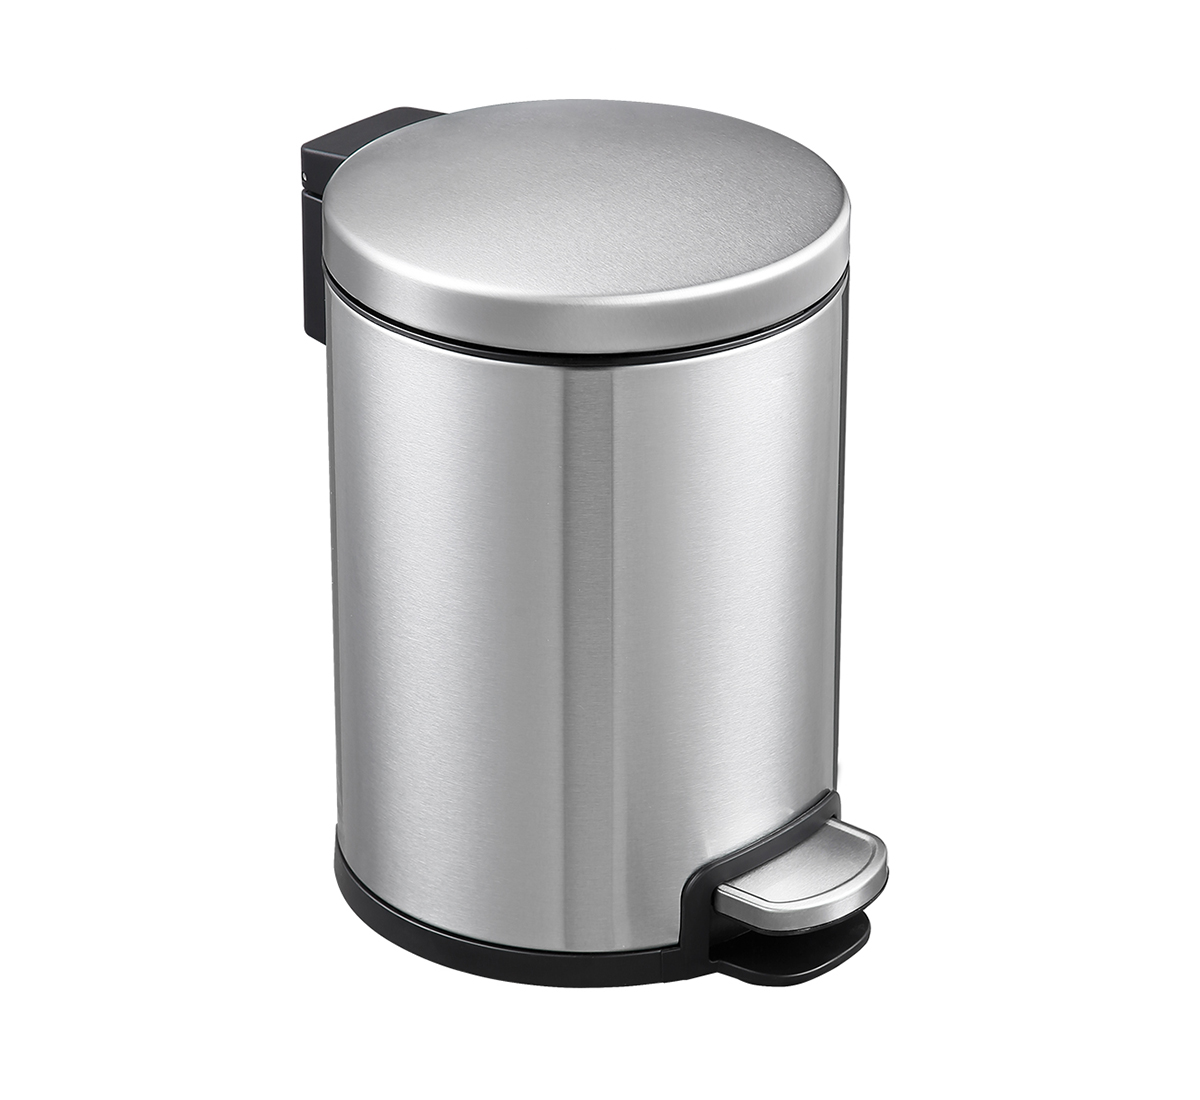 3L Round Stainless Steel Pedal Bin